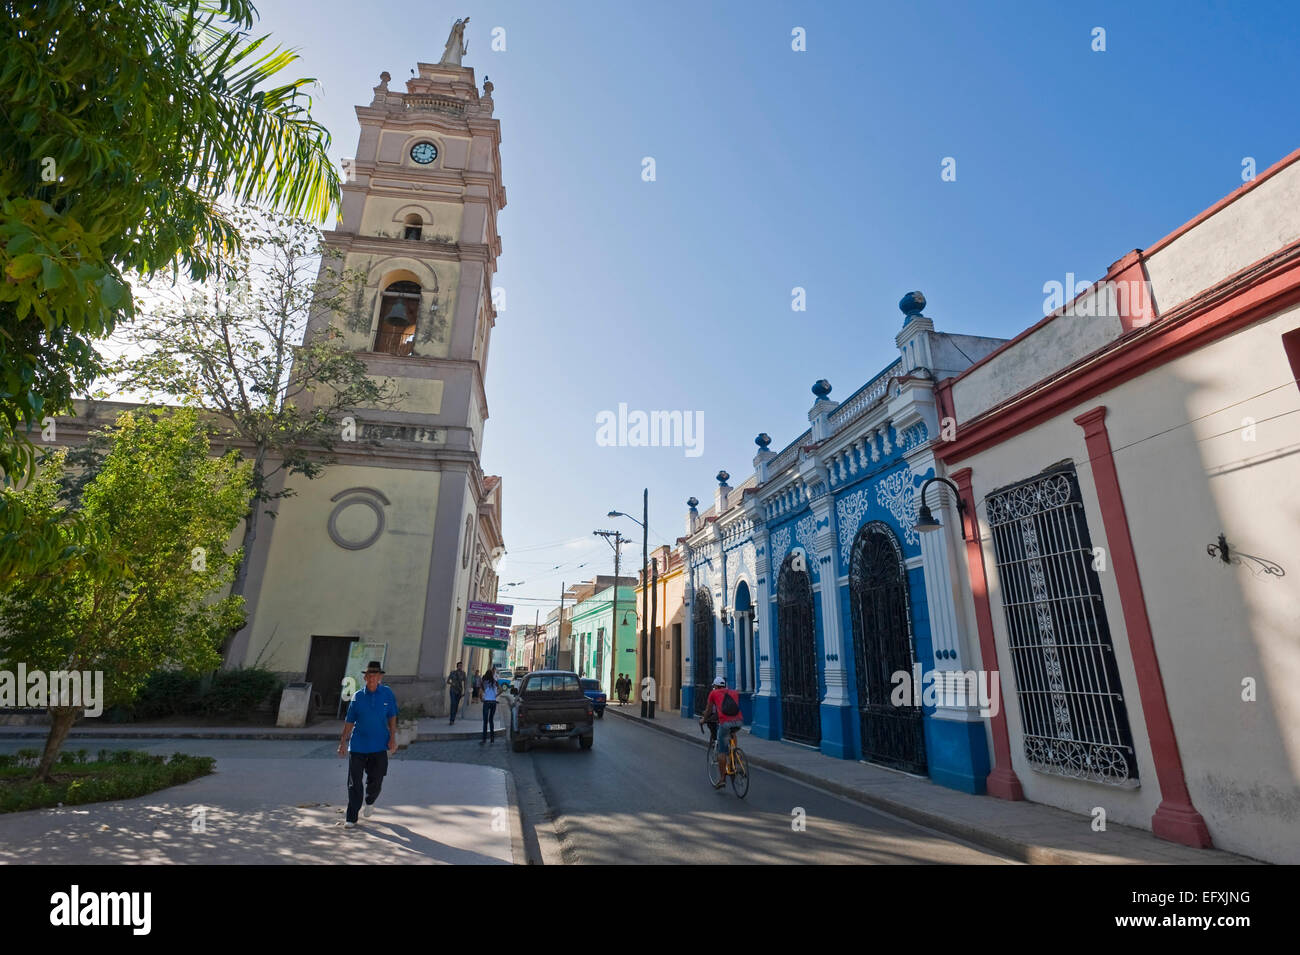 Horizontal street view of Calle Cisneros with the Iglesia Bautista cathedral in Camaguey, Cuba. Stock Photo